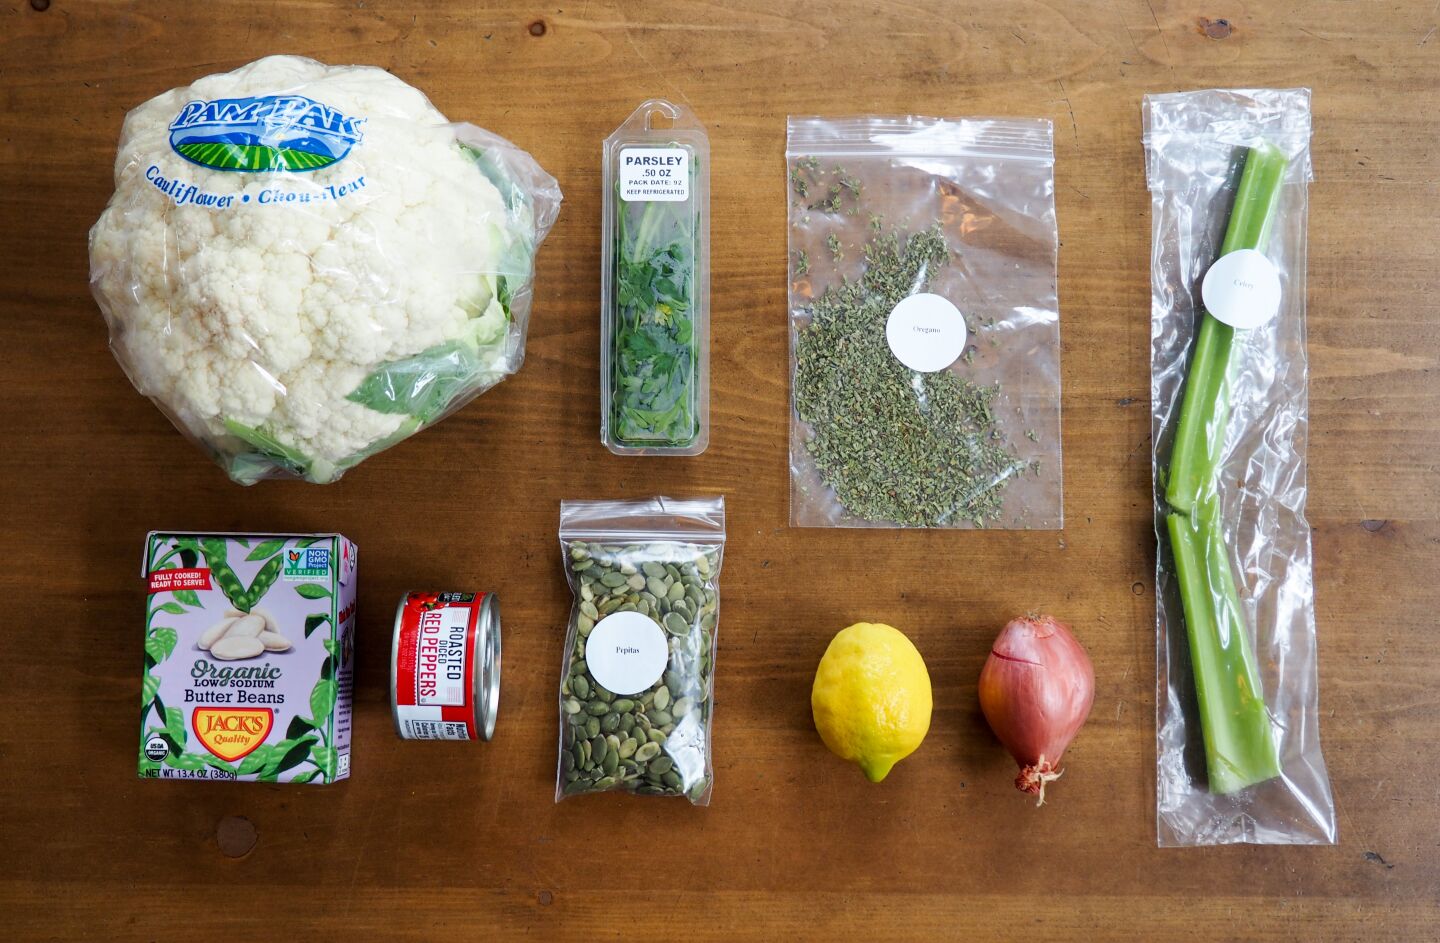 Ingredients for the Purple Carrot cauliflower steaks with pepita romesco sauce and celery salad.